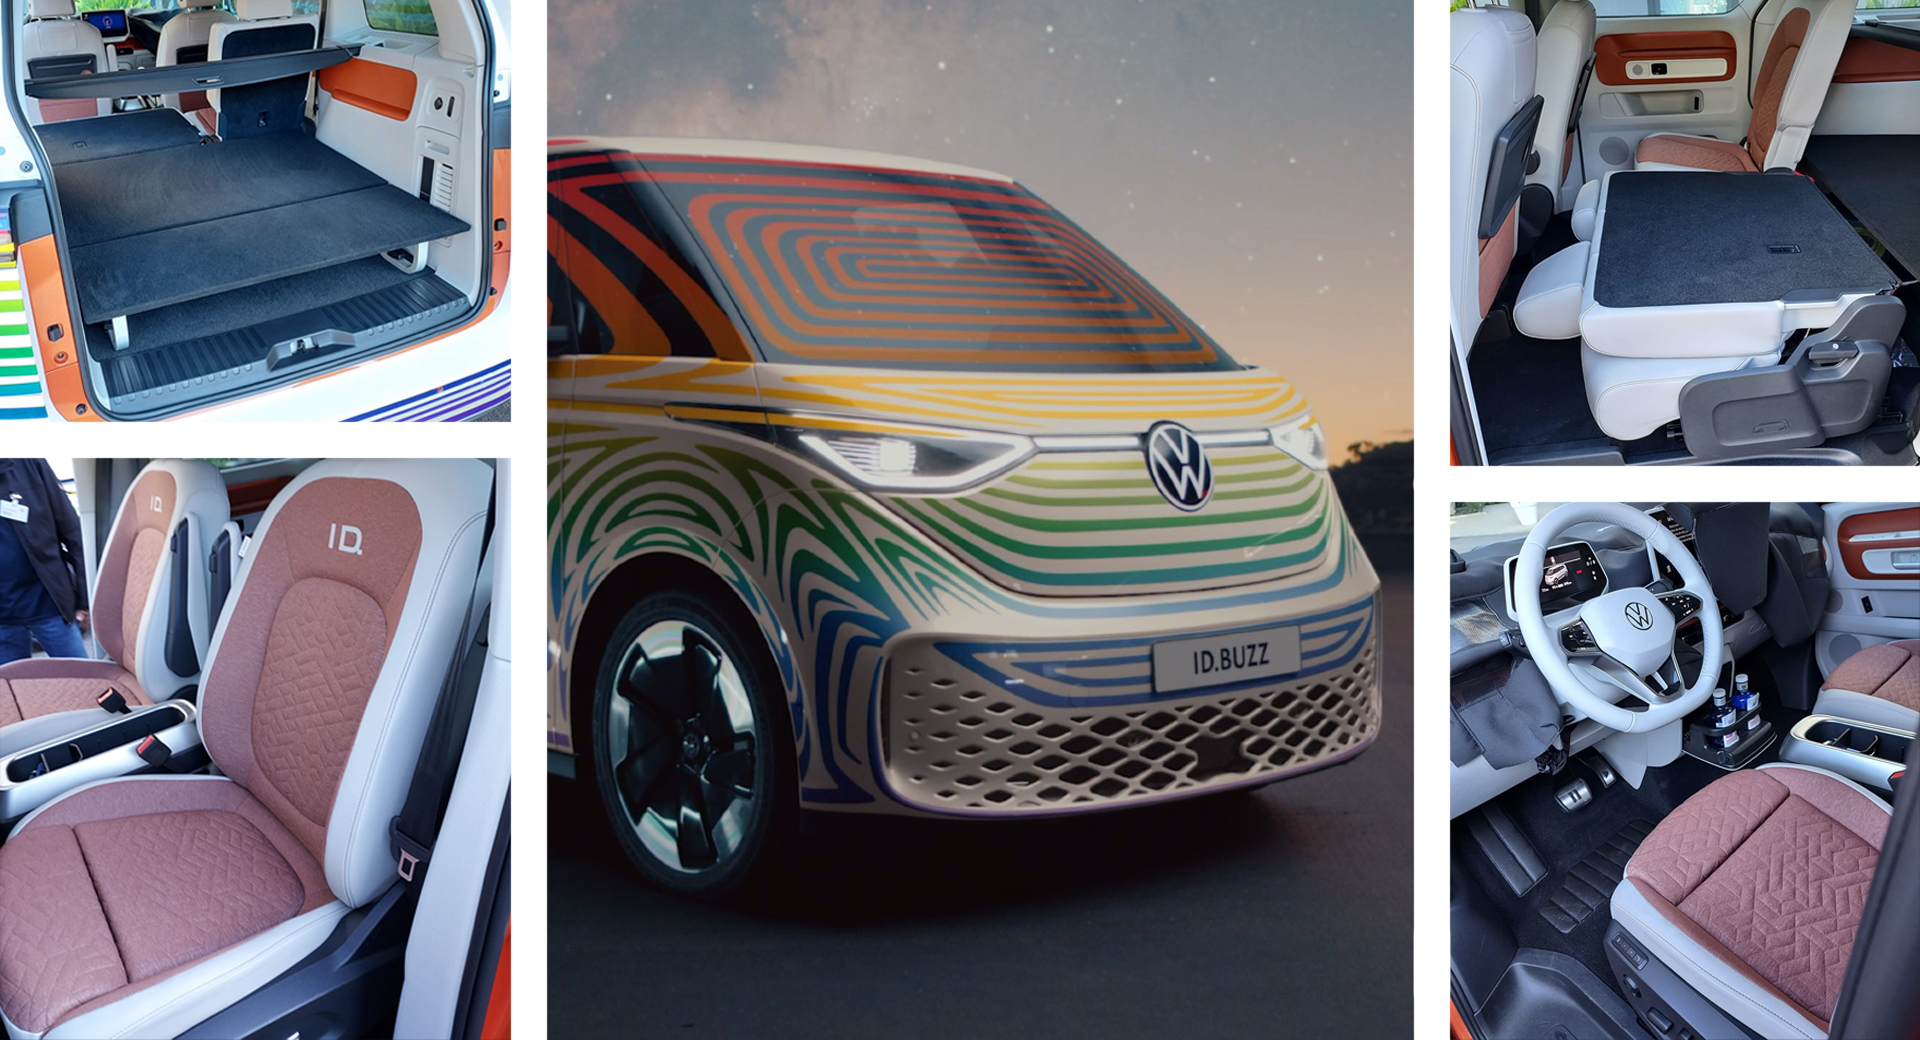 Leaked Vw Id Buzz Interior Photos Show A Colorful But Rather